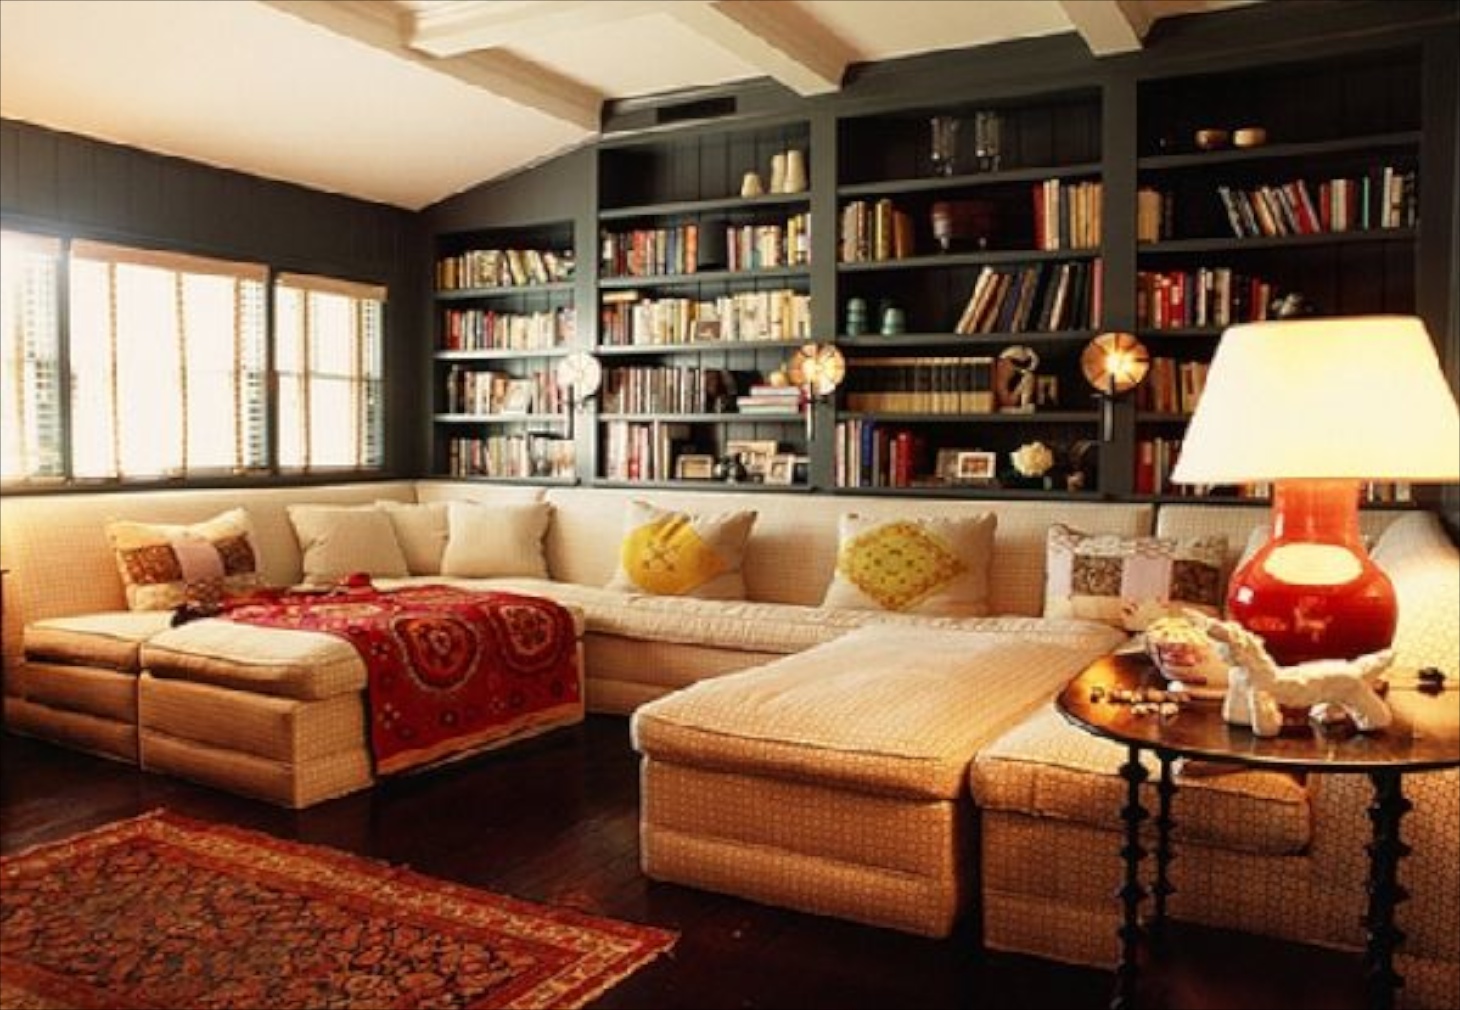 23_Sofas-and-Bookcase-Ideas-in-Cozy-Living-Room-Design-with-Mixture ...